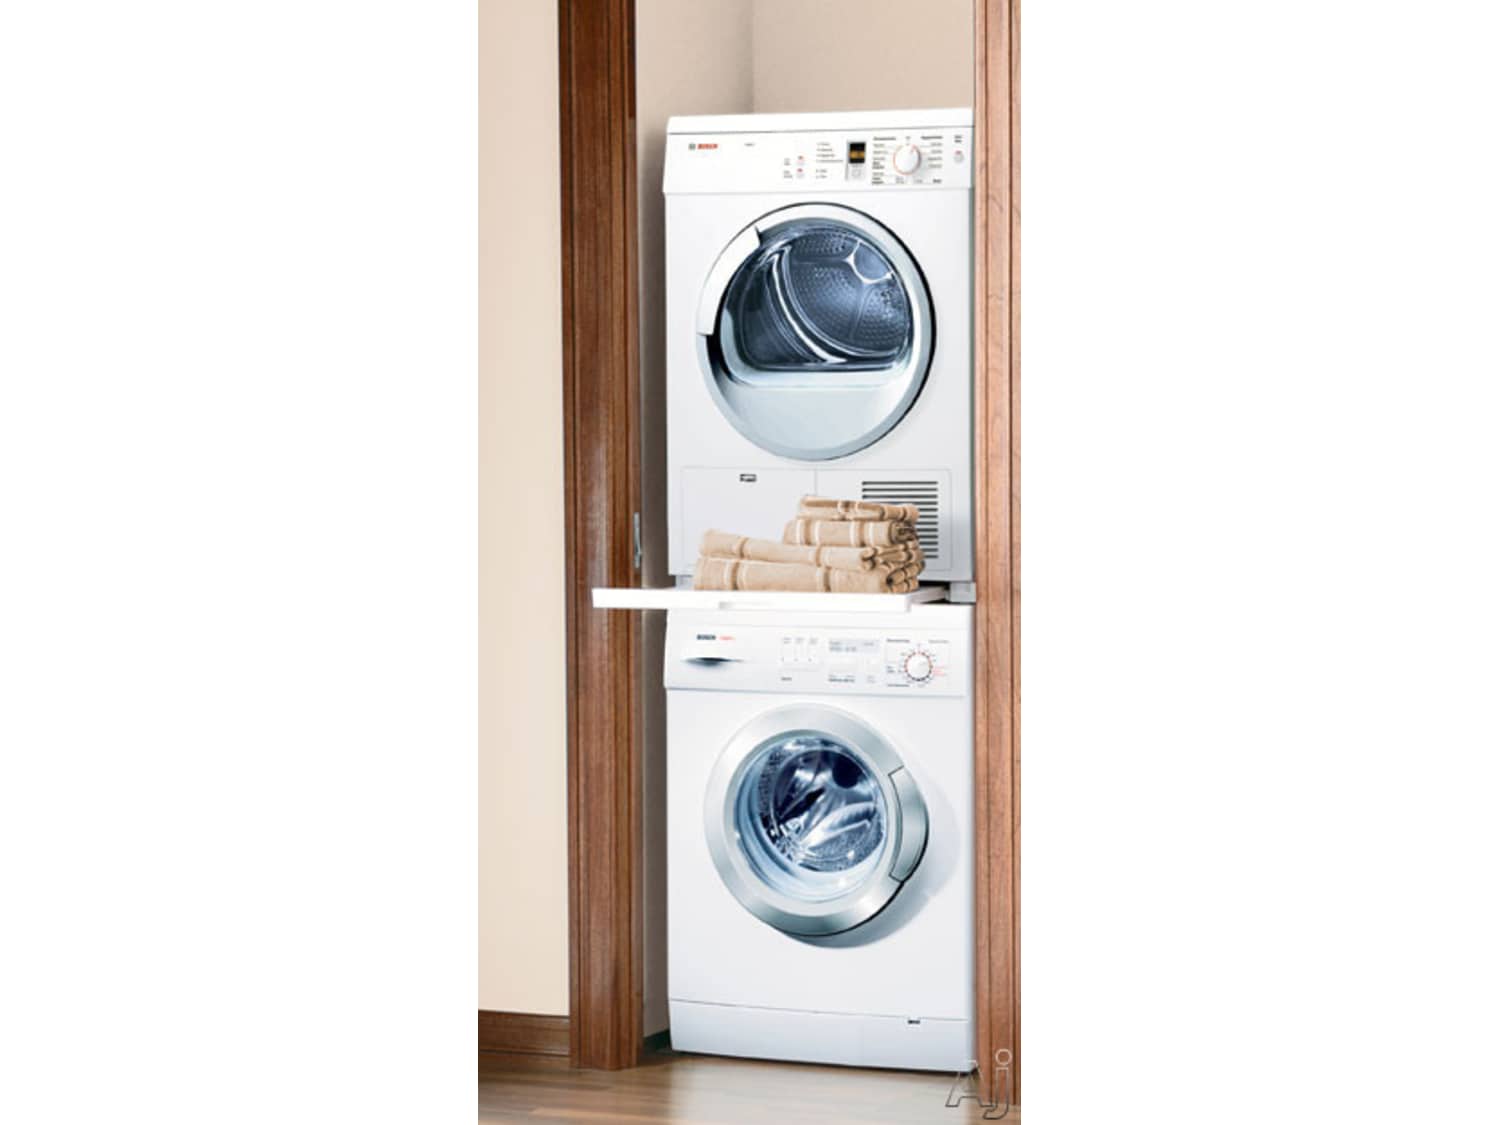 Ventless Dryer/Washer Combo (Bosch Axxis) - Apartment Therapy's Bazaar. Best Portable Washer Dryer Combo For Apartments Ventless